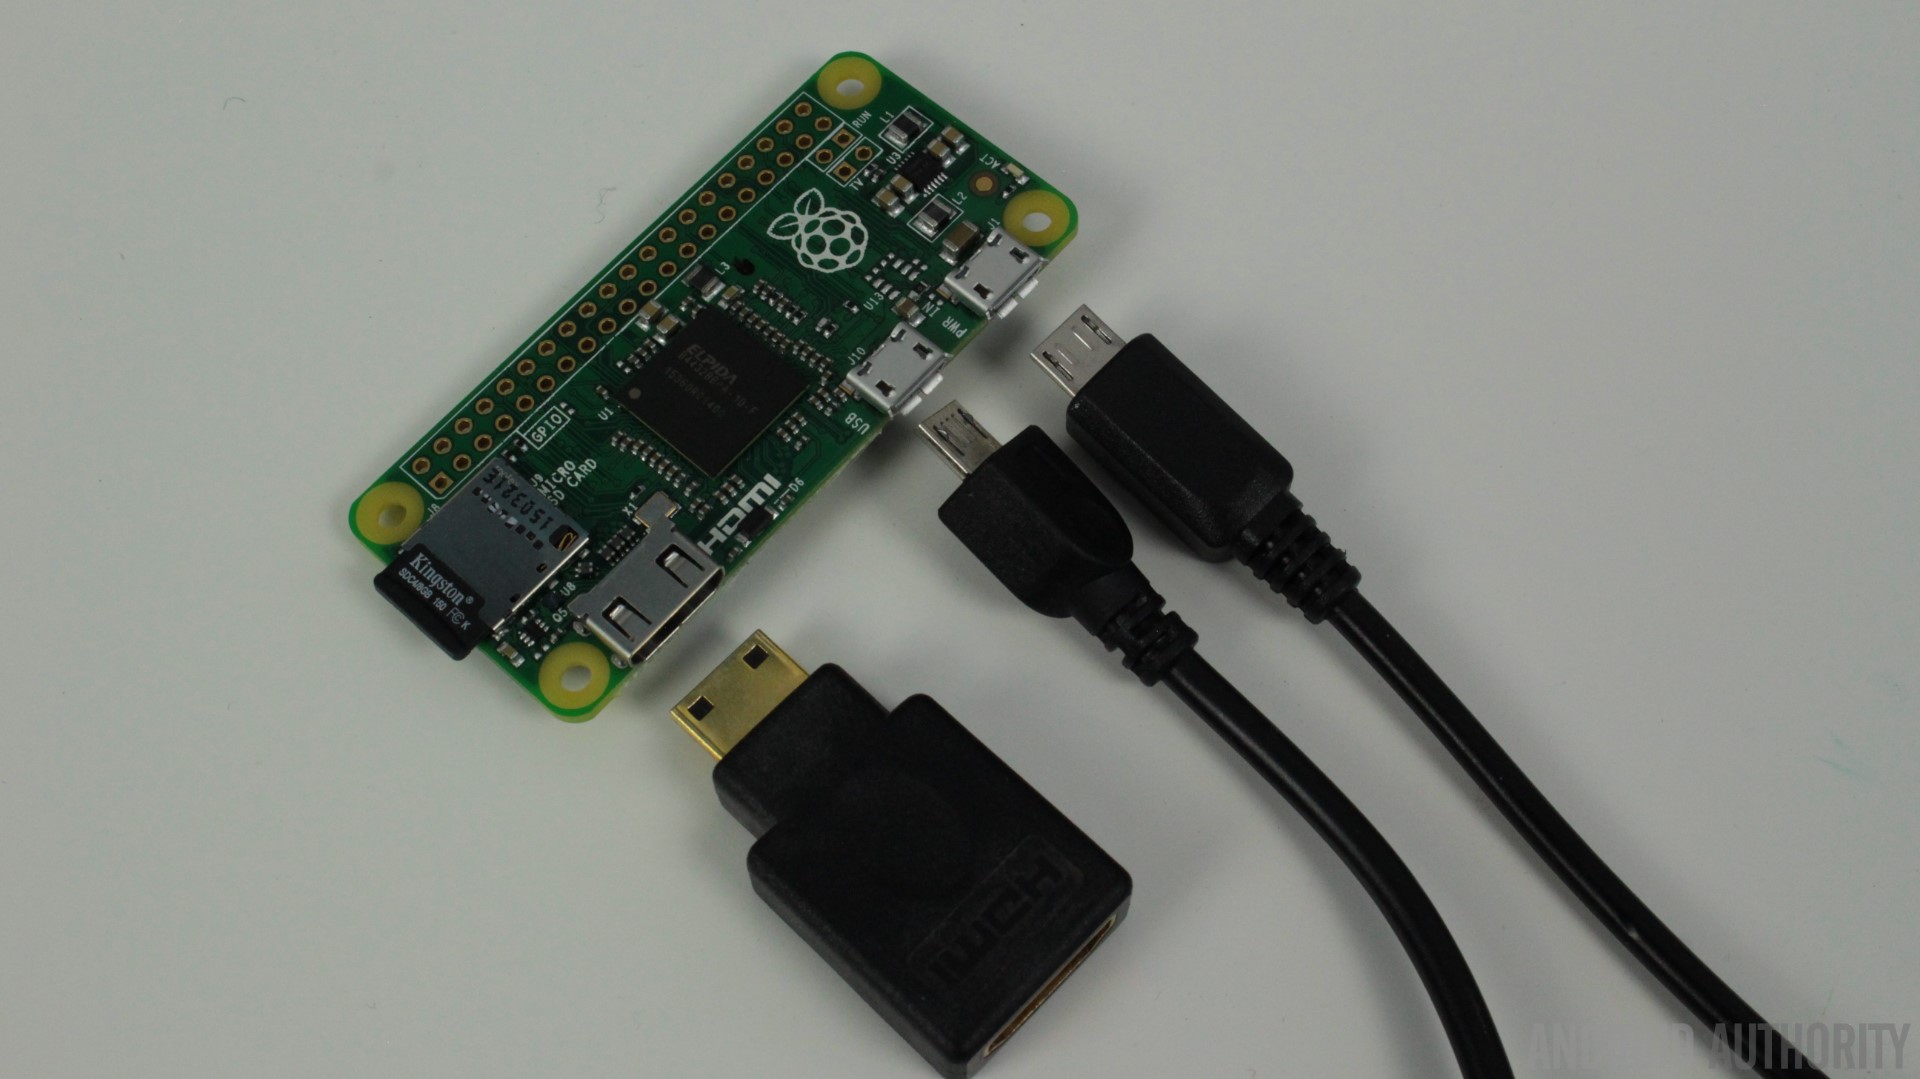 A Raspberry Pi Zero connected to power